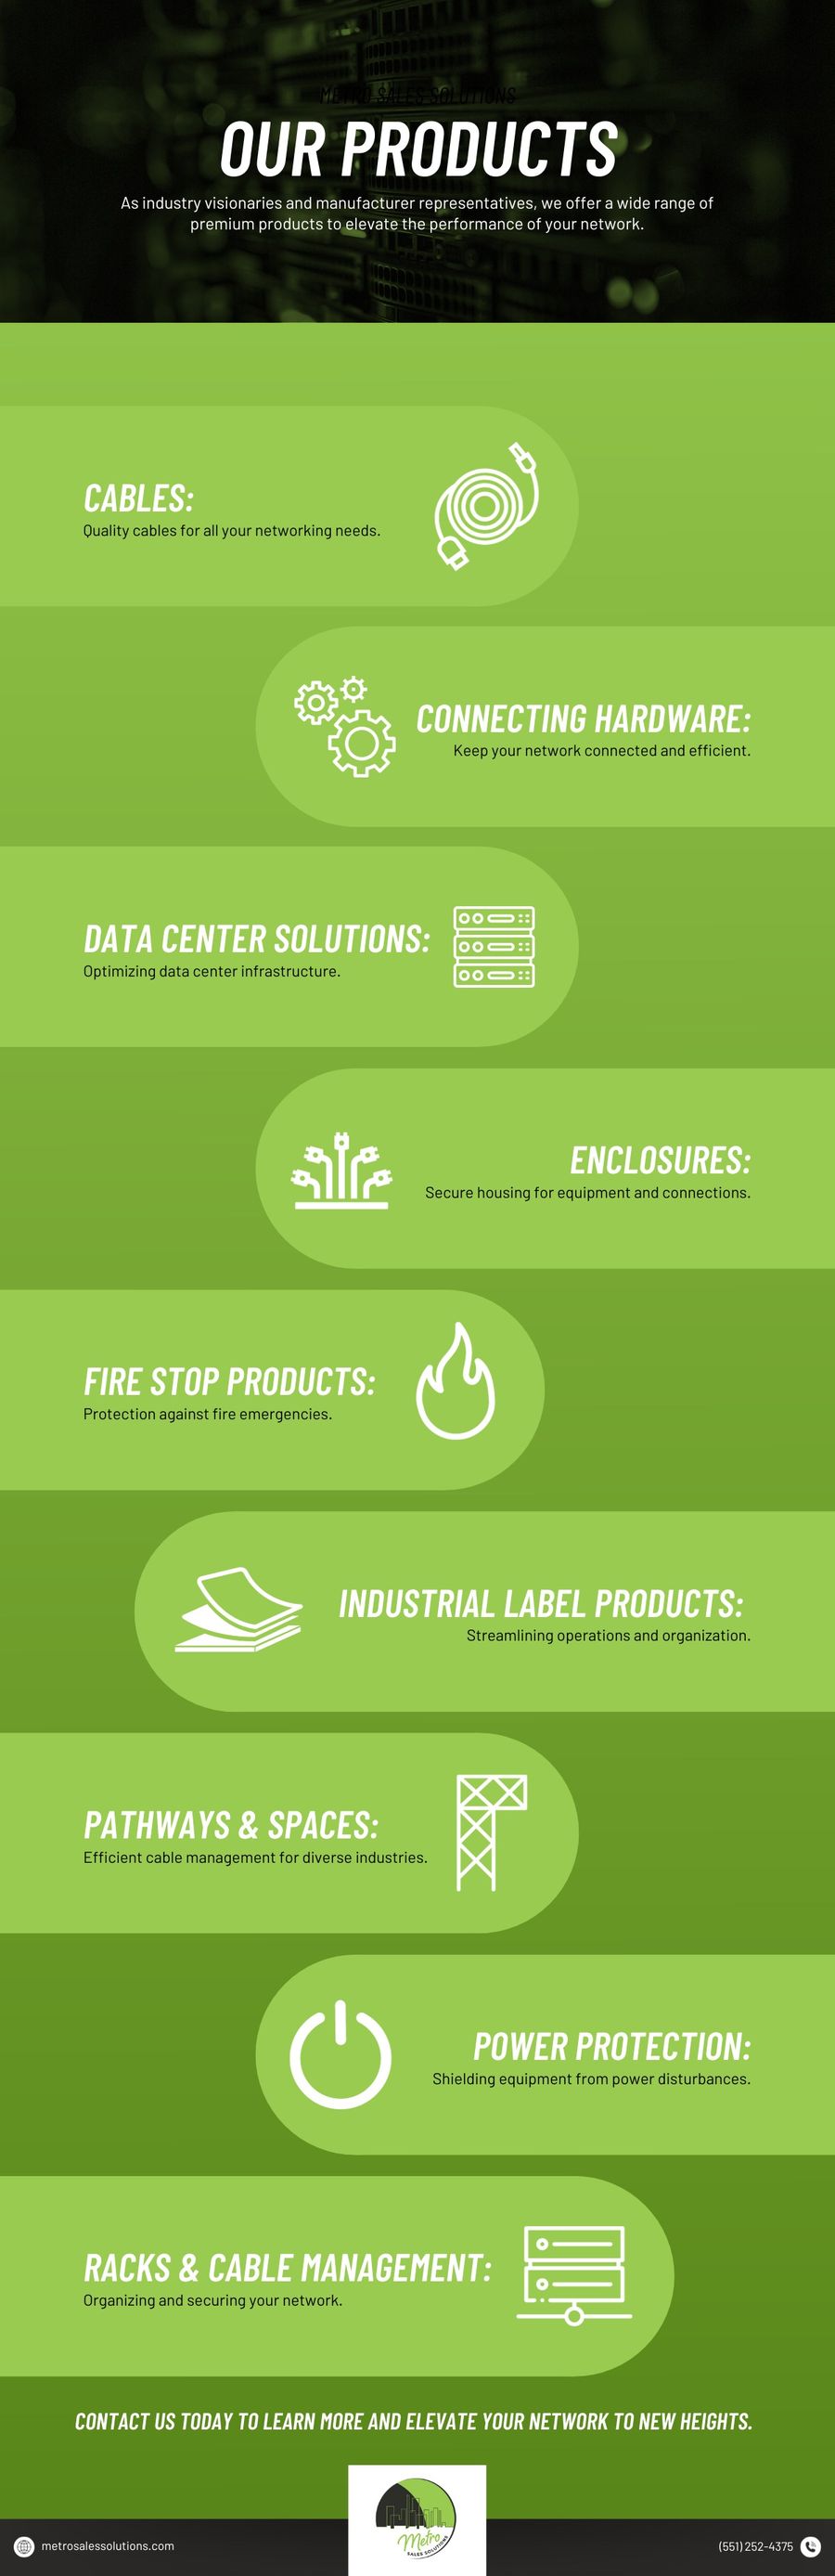 M40212 - Metro Sales Solutions - Infographic - Our Products .jpg